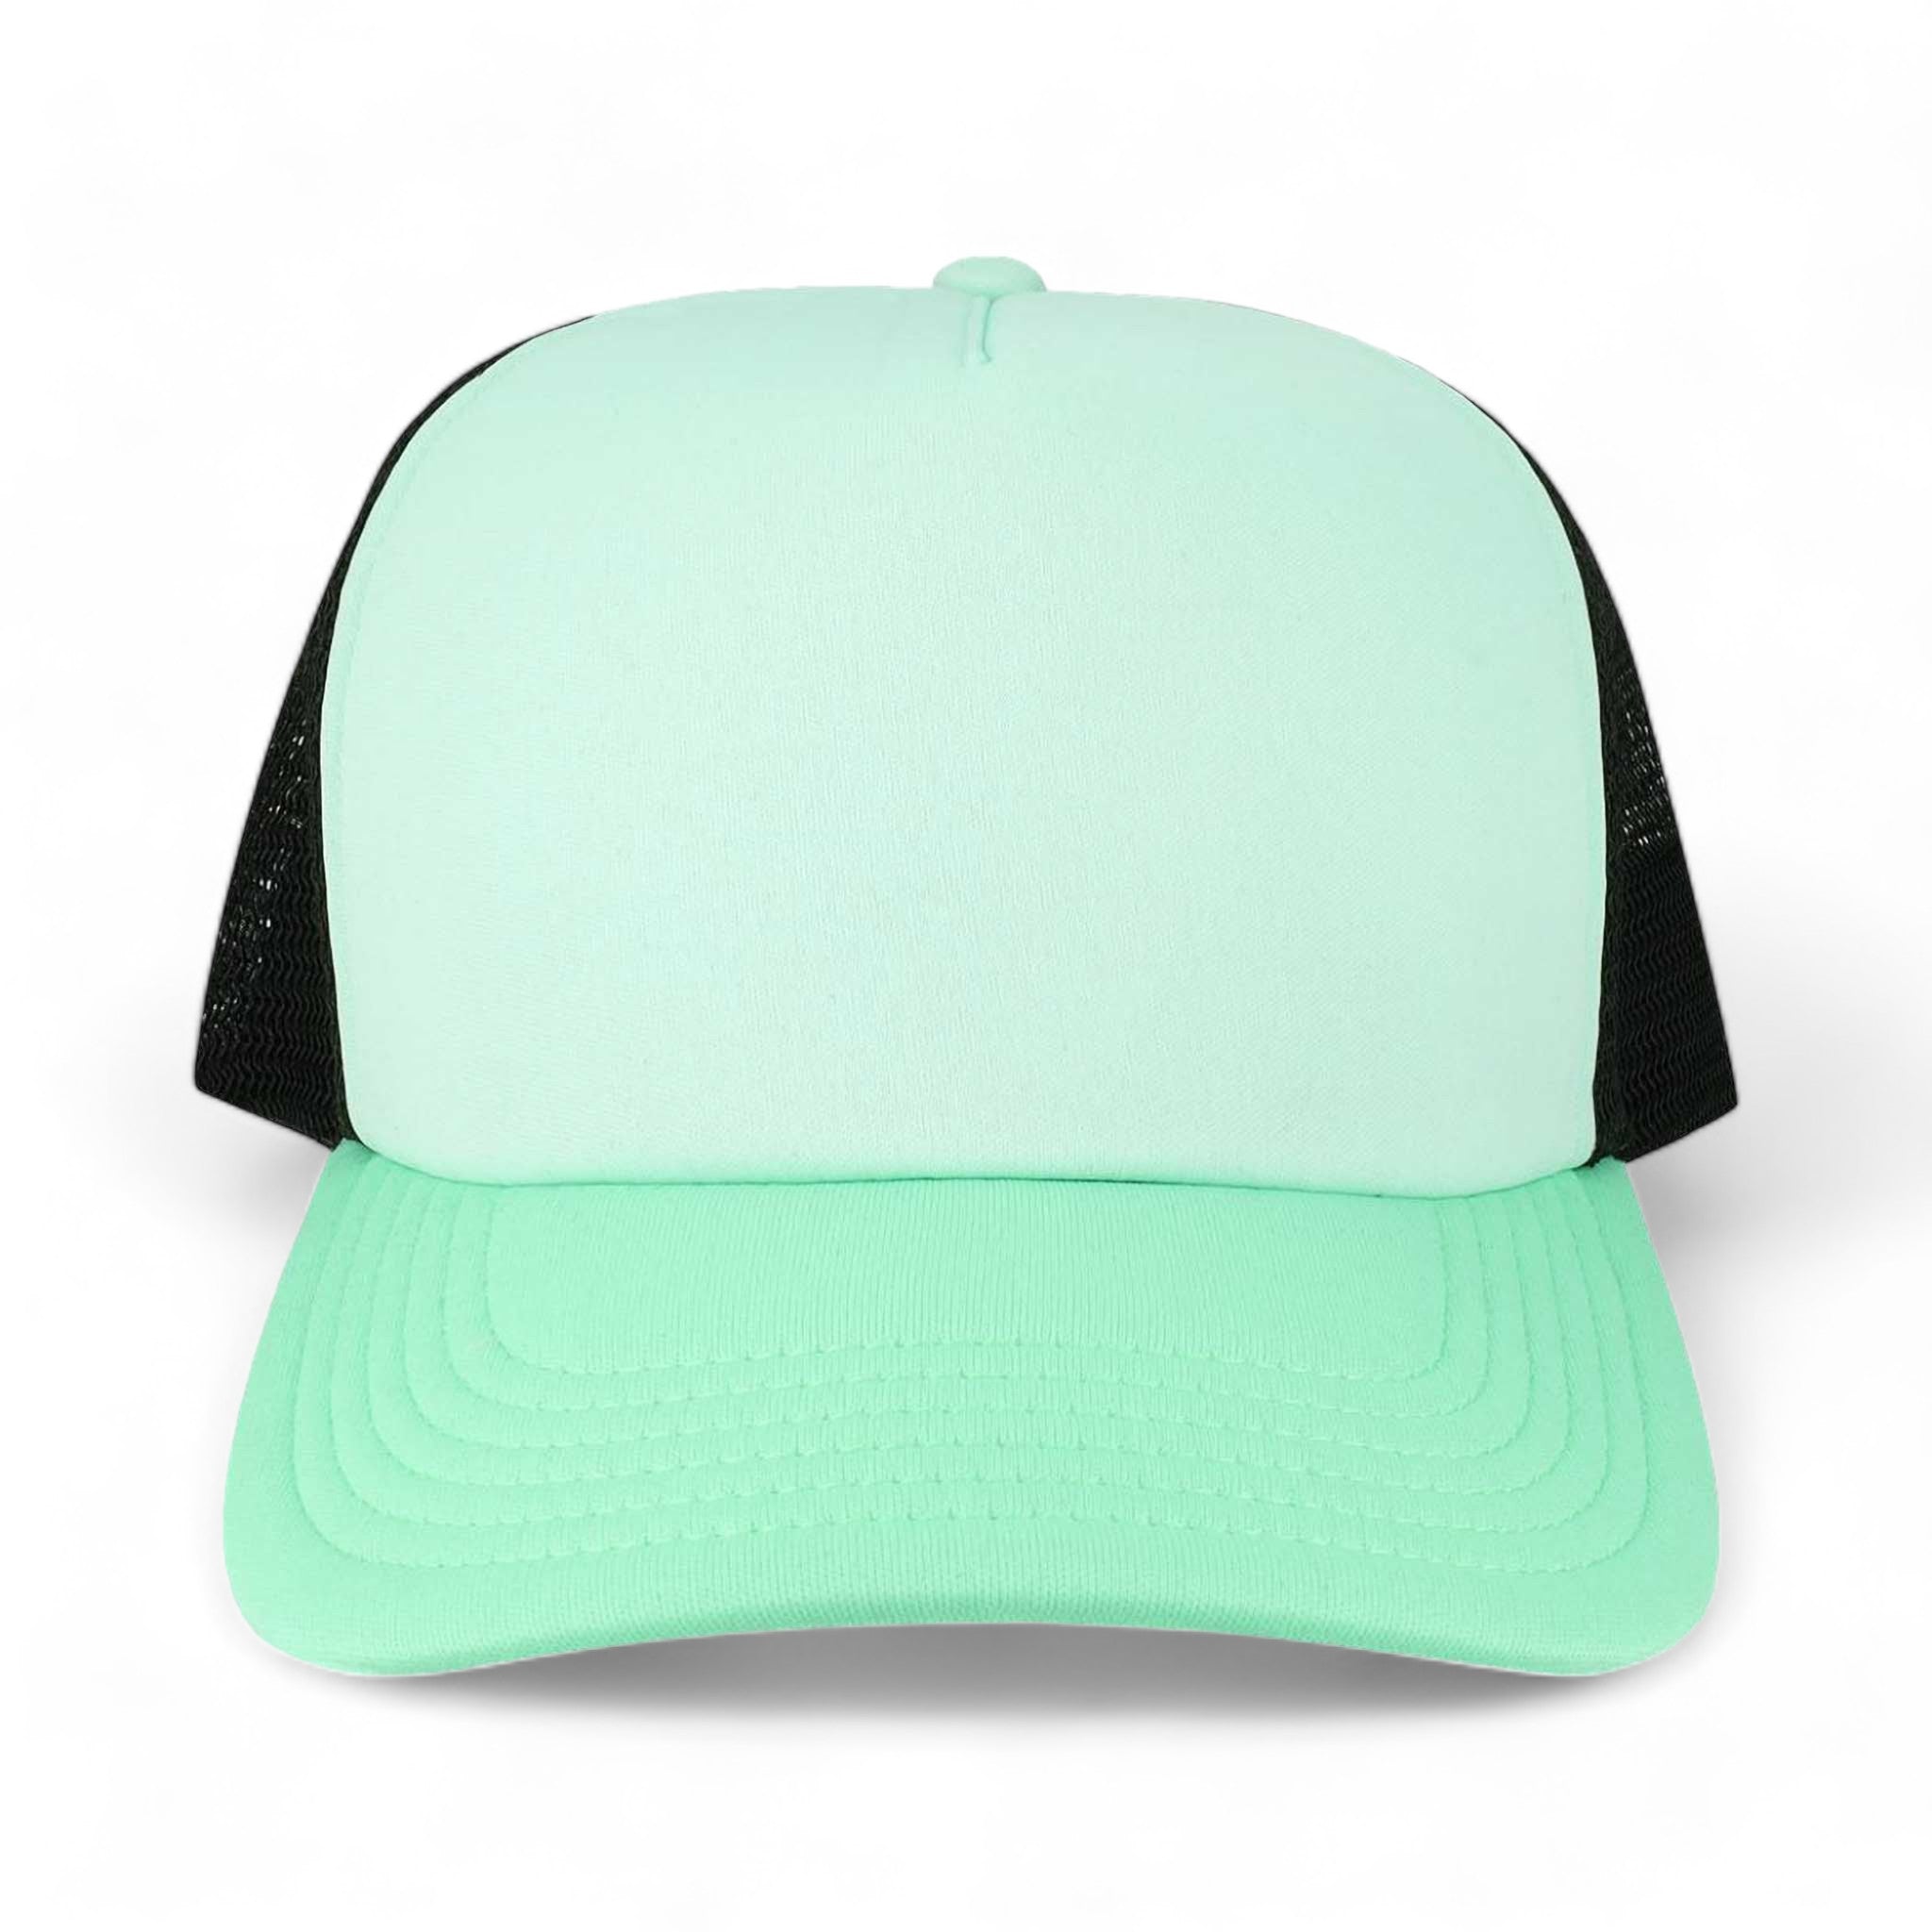 Front view of LEGACY LTA custom hat in light mint, dark mint and black